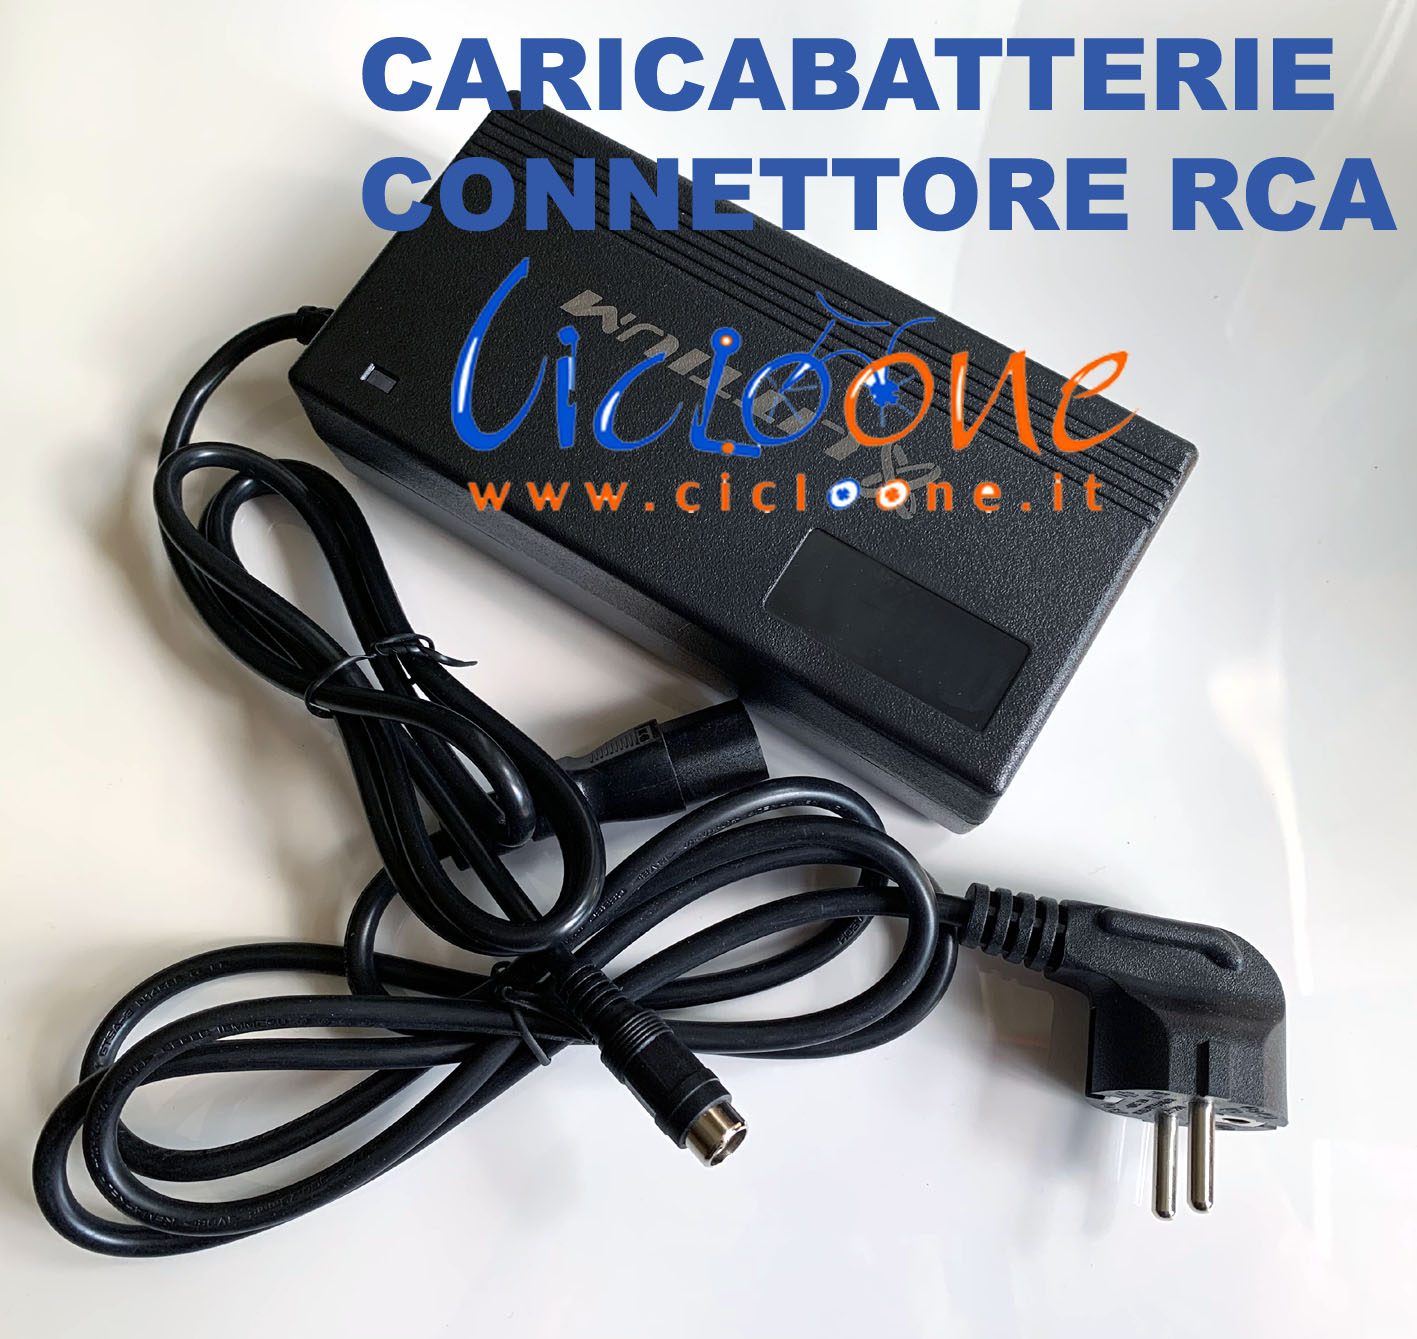 caricabatterie 36V 3A connettore rca